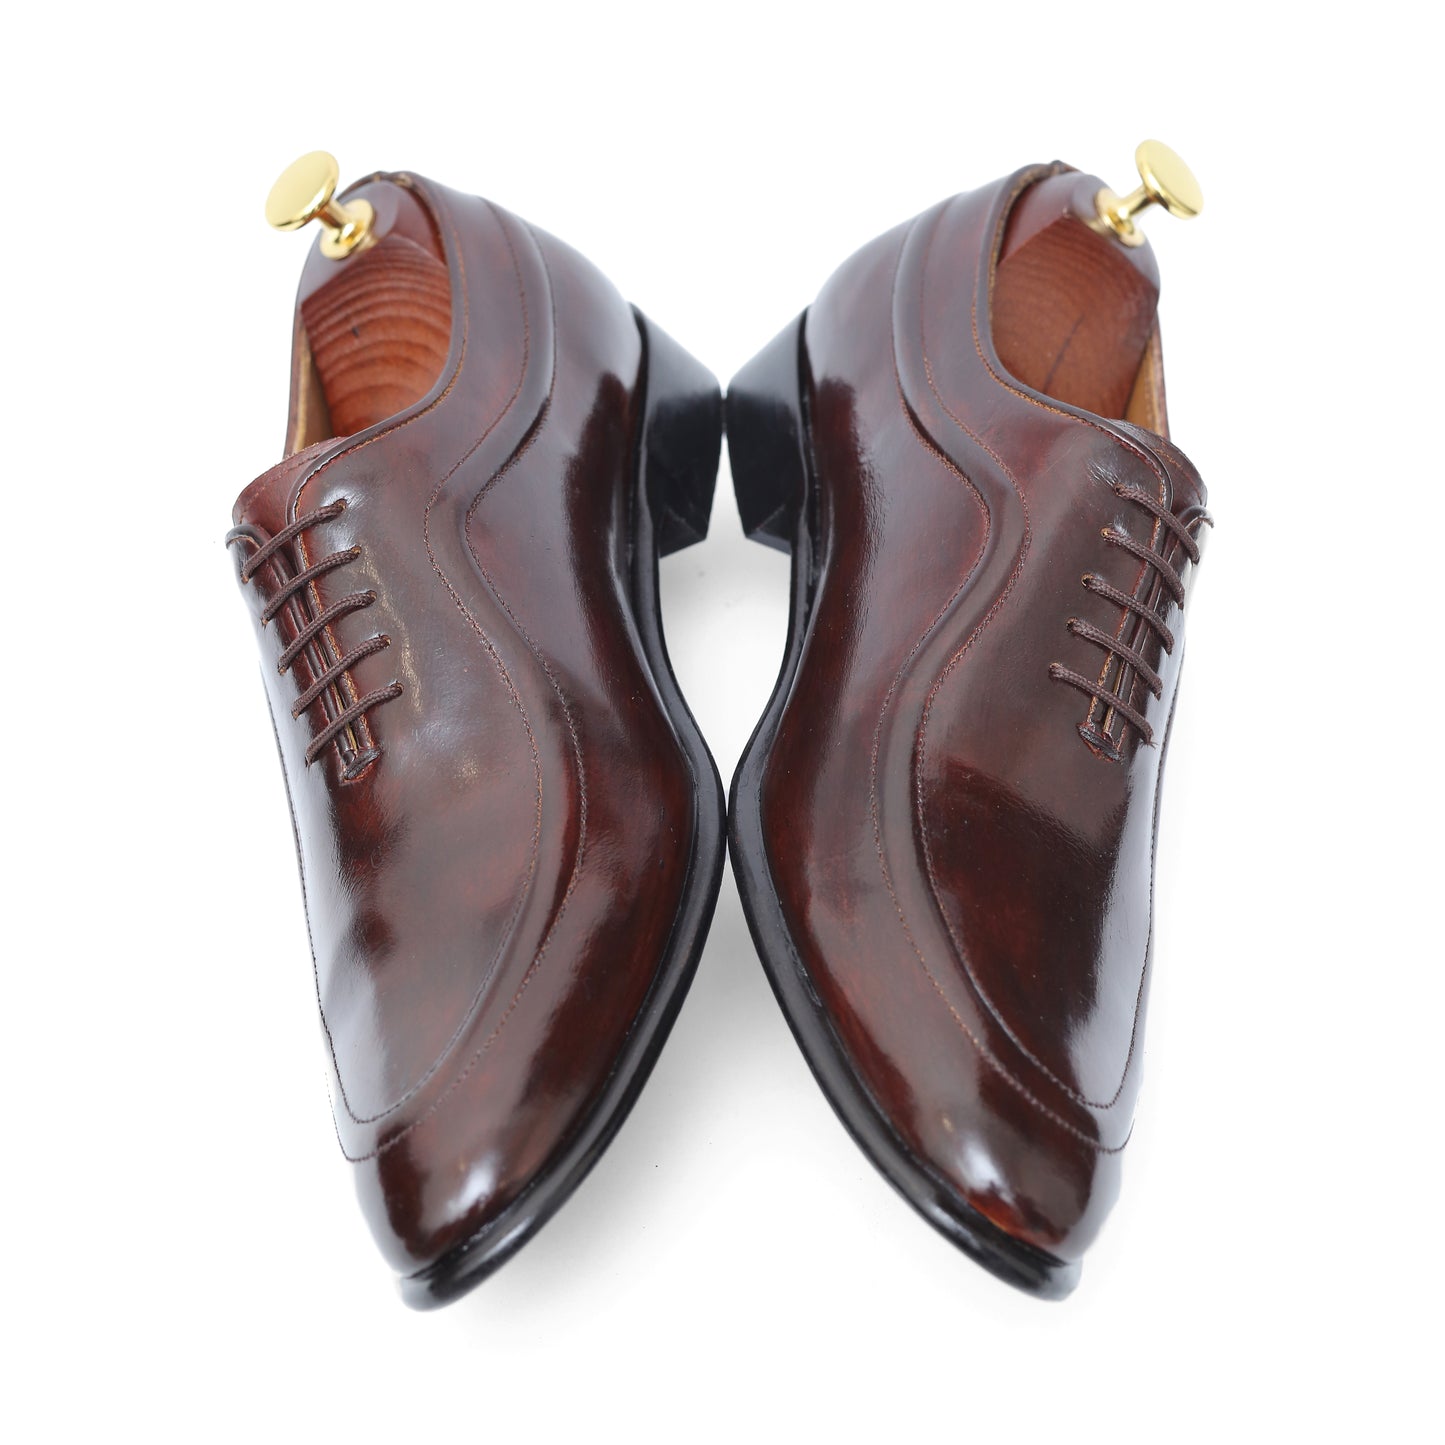 BROWN PIPELINE TWO TONE LEATHER SHOES